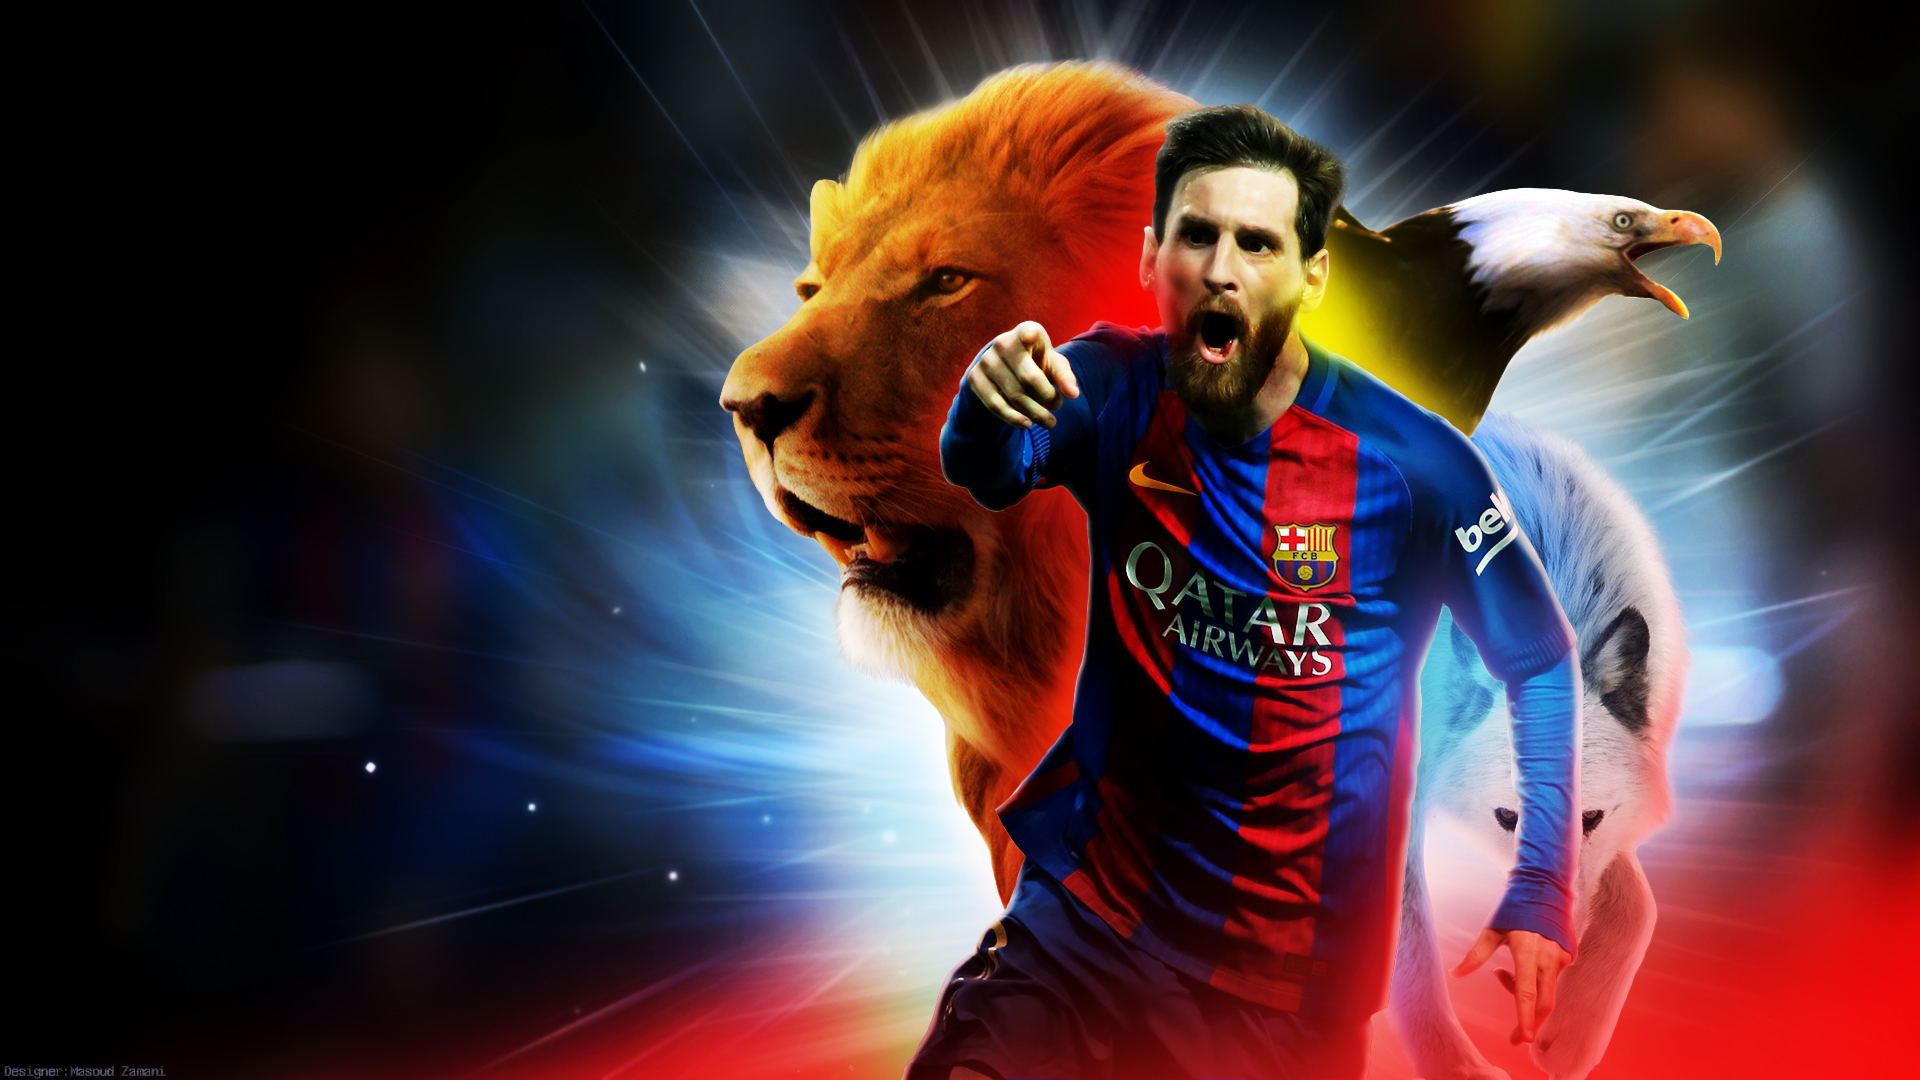 Messi Hd 2017 Wallpapers